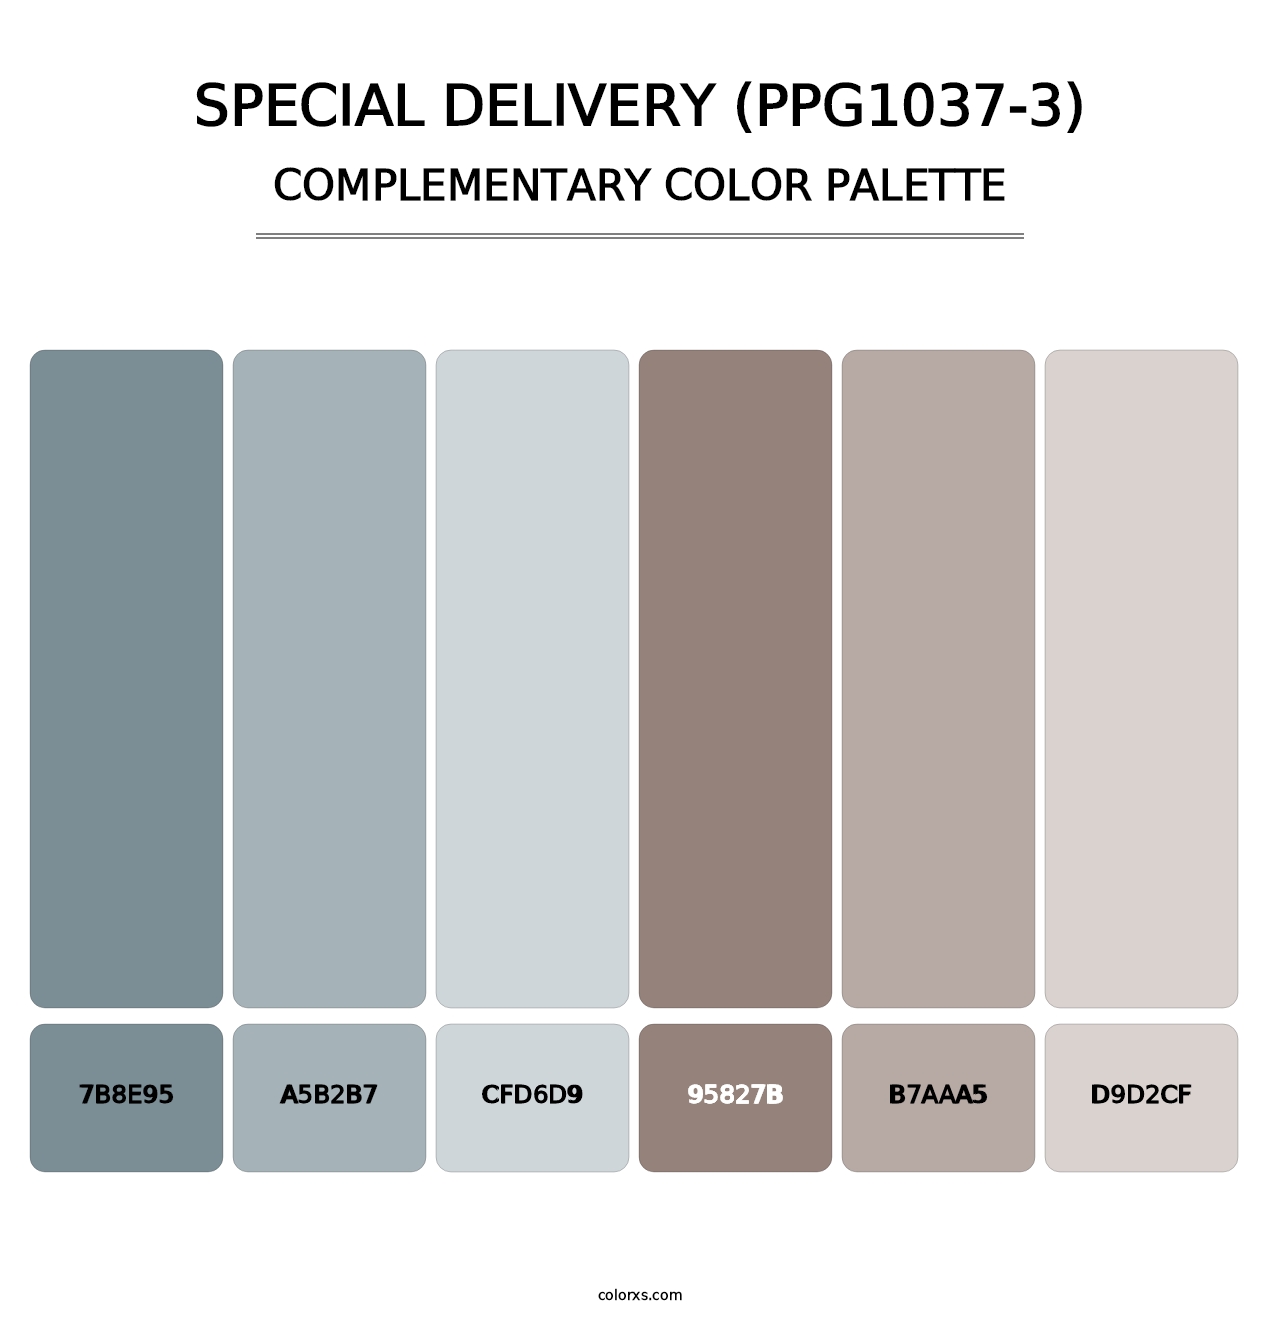 Special Delivery (PPG1037-3) - Complementary Color Palette